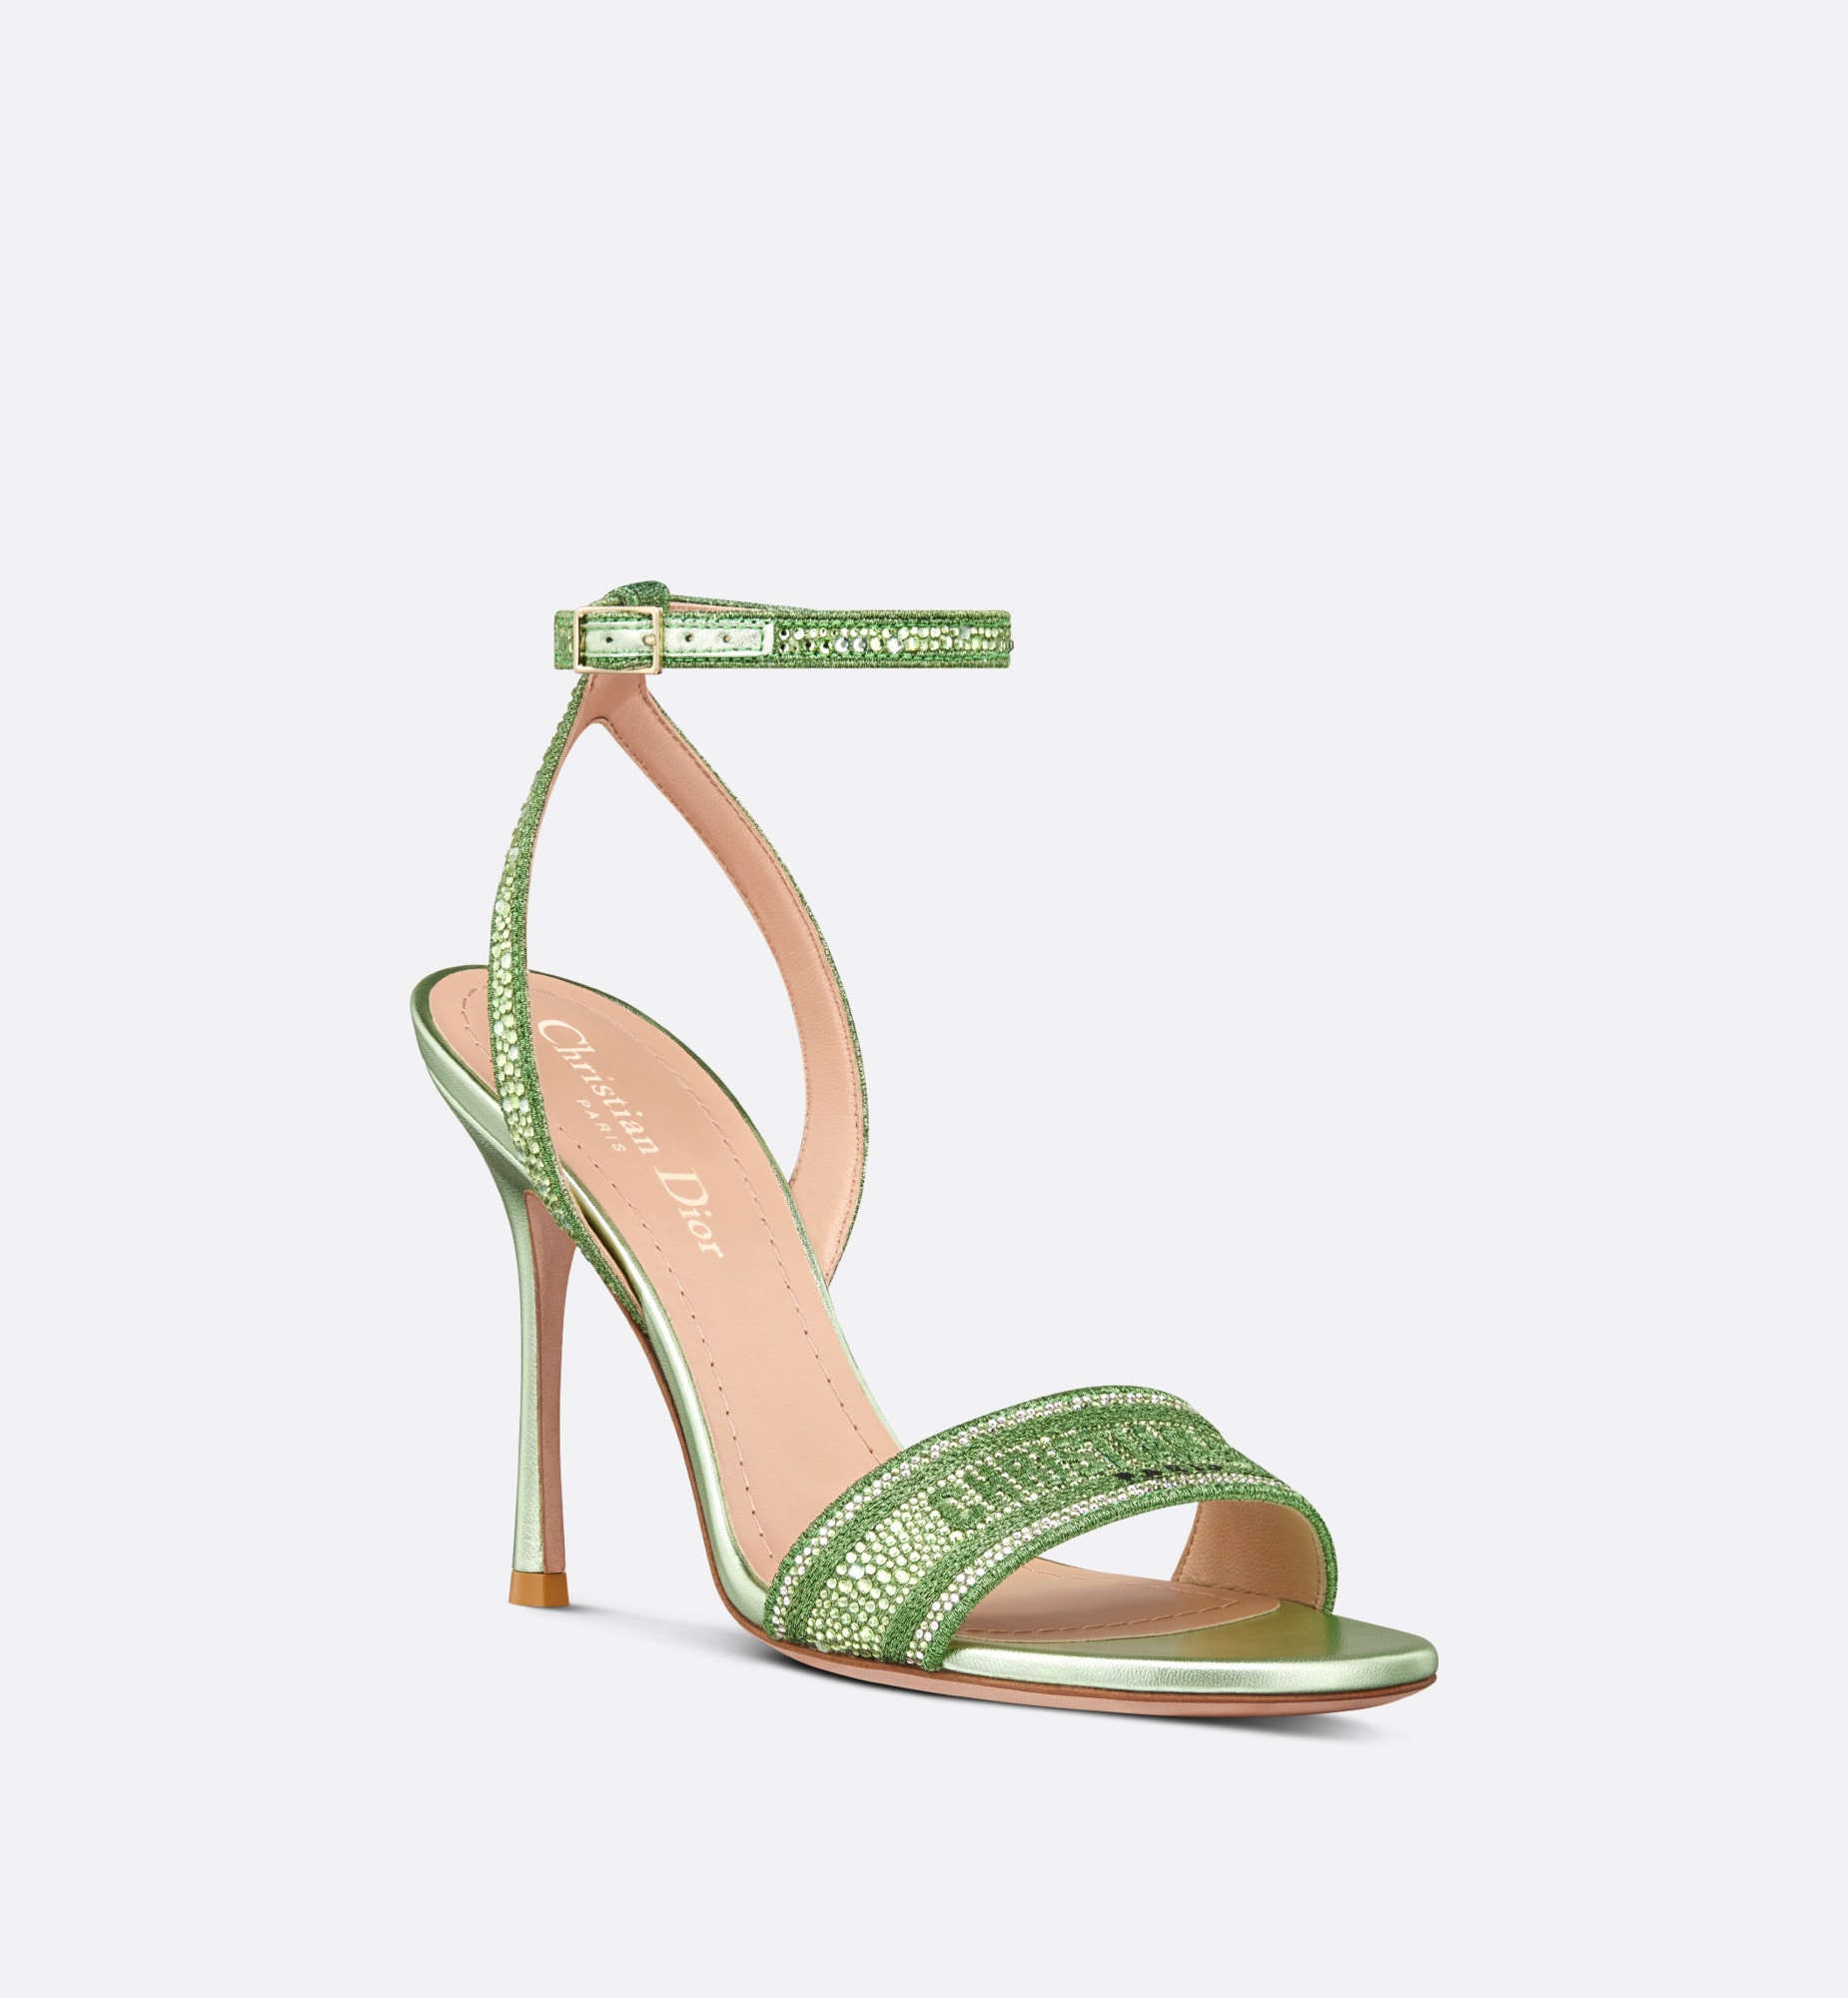 Dway Heeled Sandal Green Cotton Embroidered with Metallic Thread and Strass christian dior dway sandals